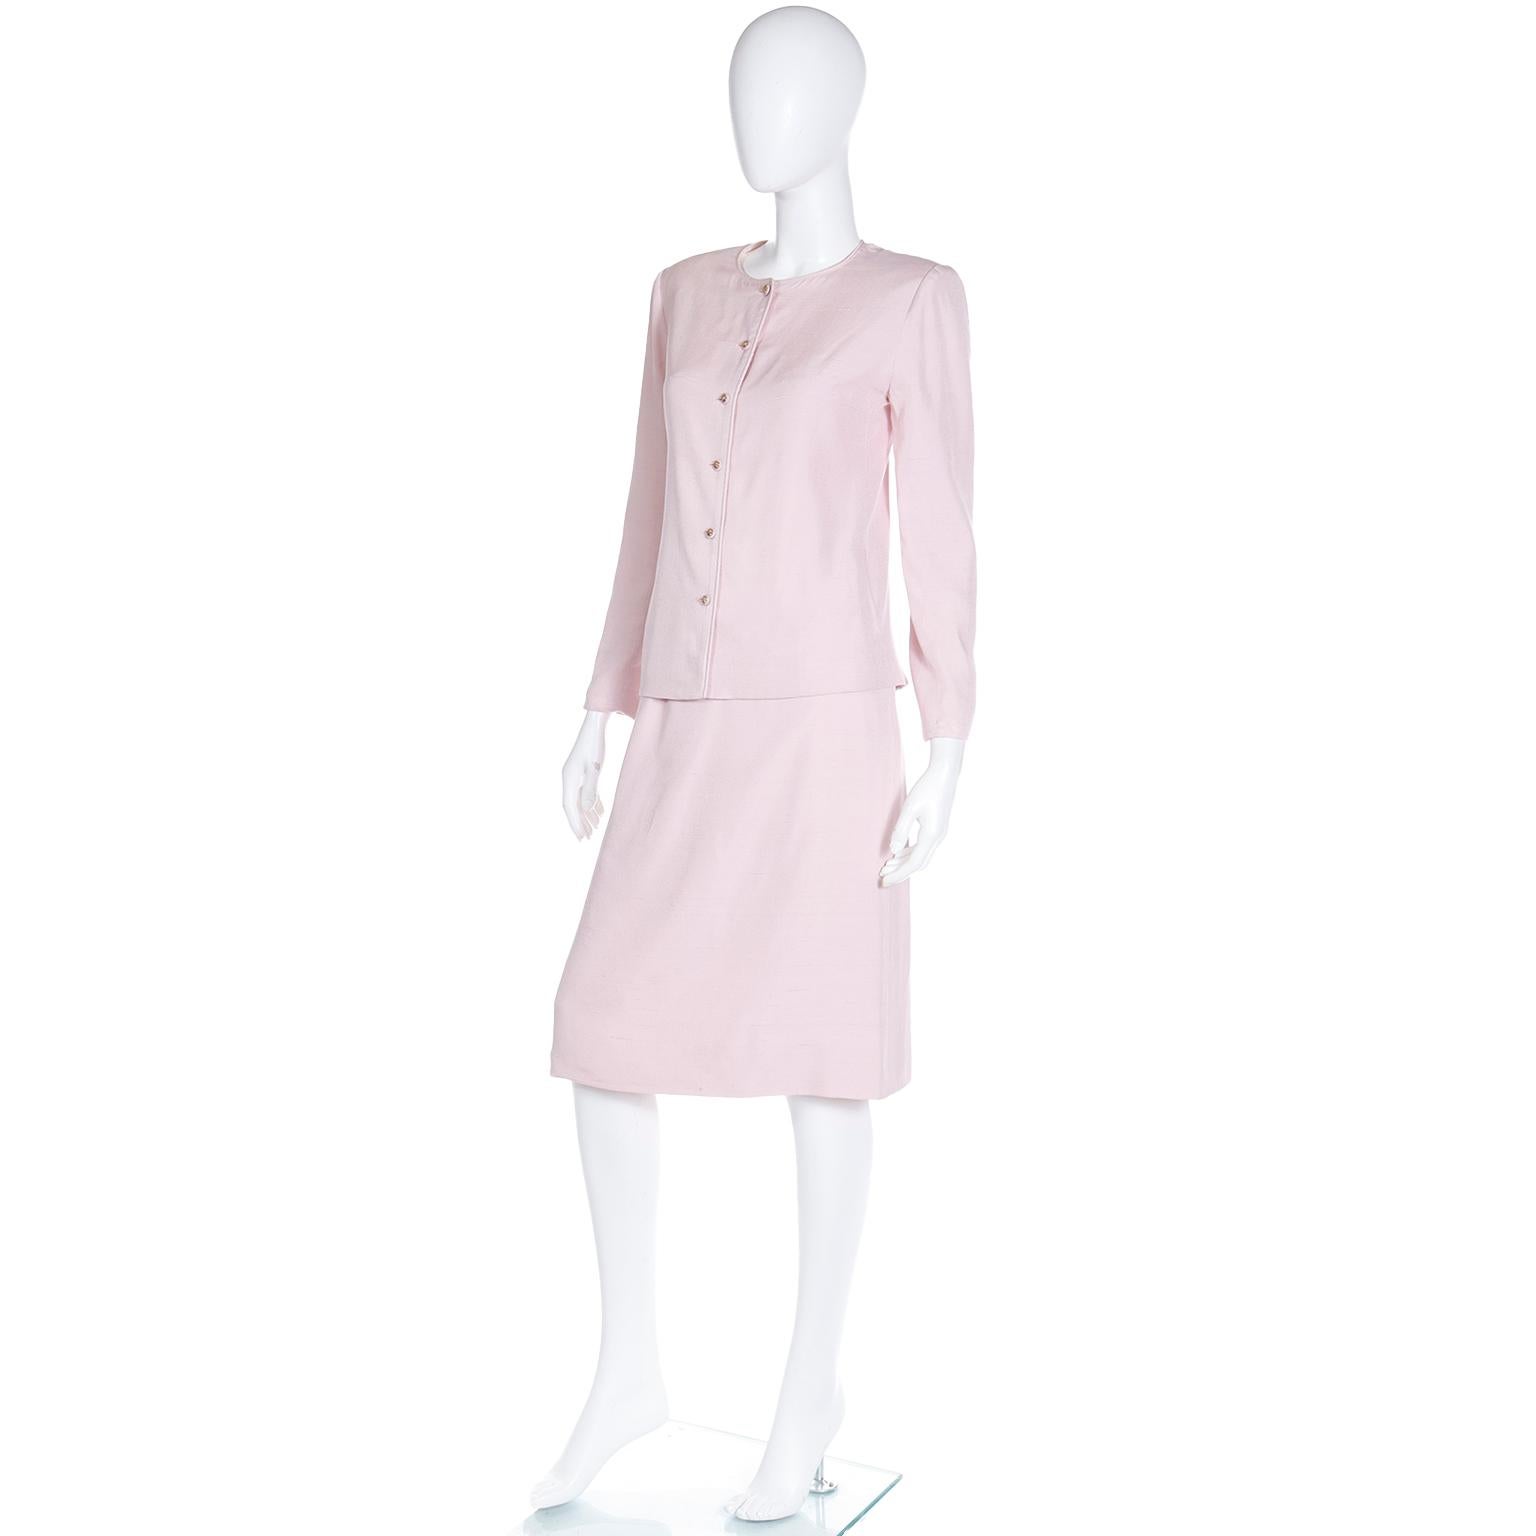 1970s Chanel Creations Philippe Guibourge Pink Silk Jacket & Skirt Suit  In Excellent Condition For Sale In Portland, OR